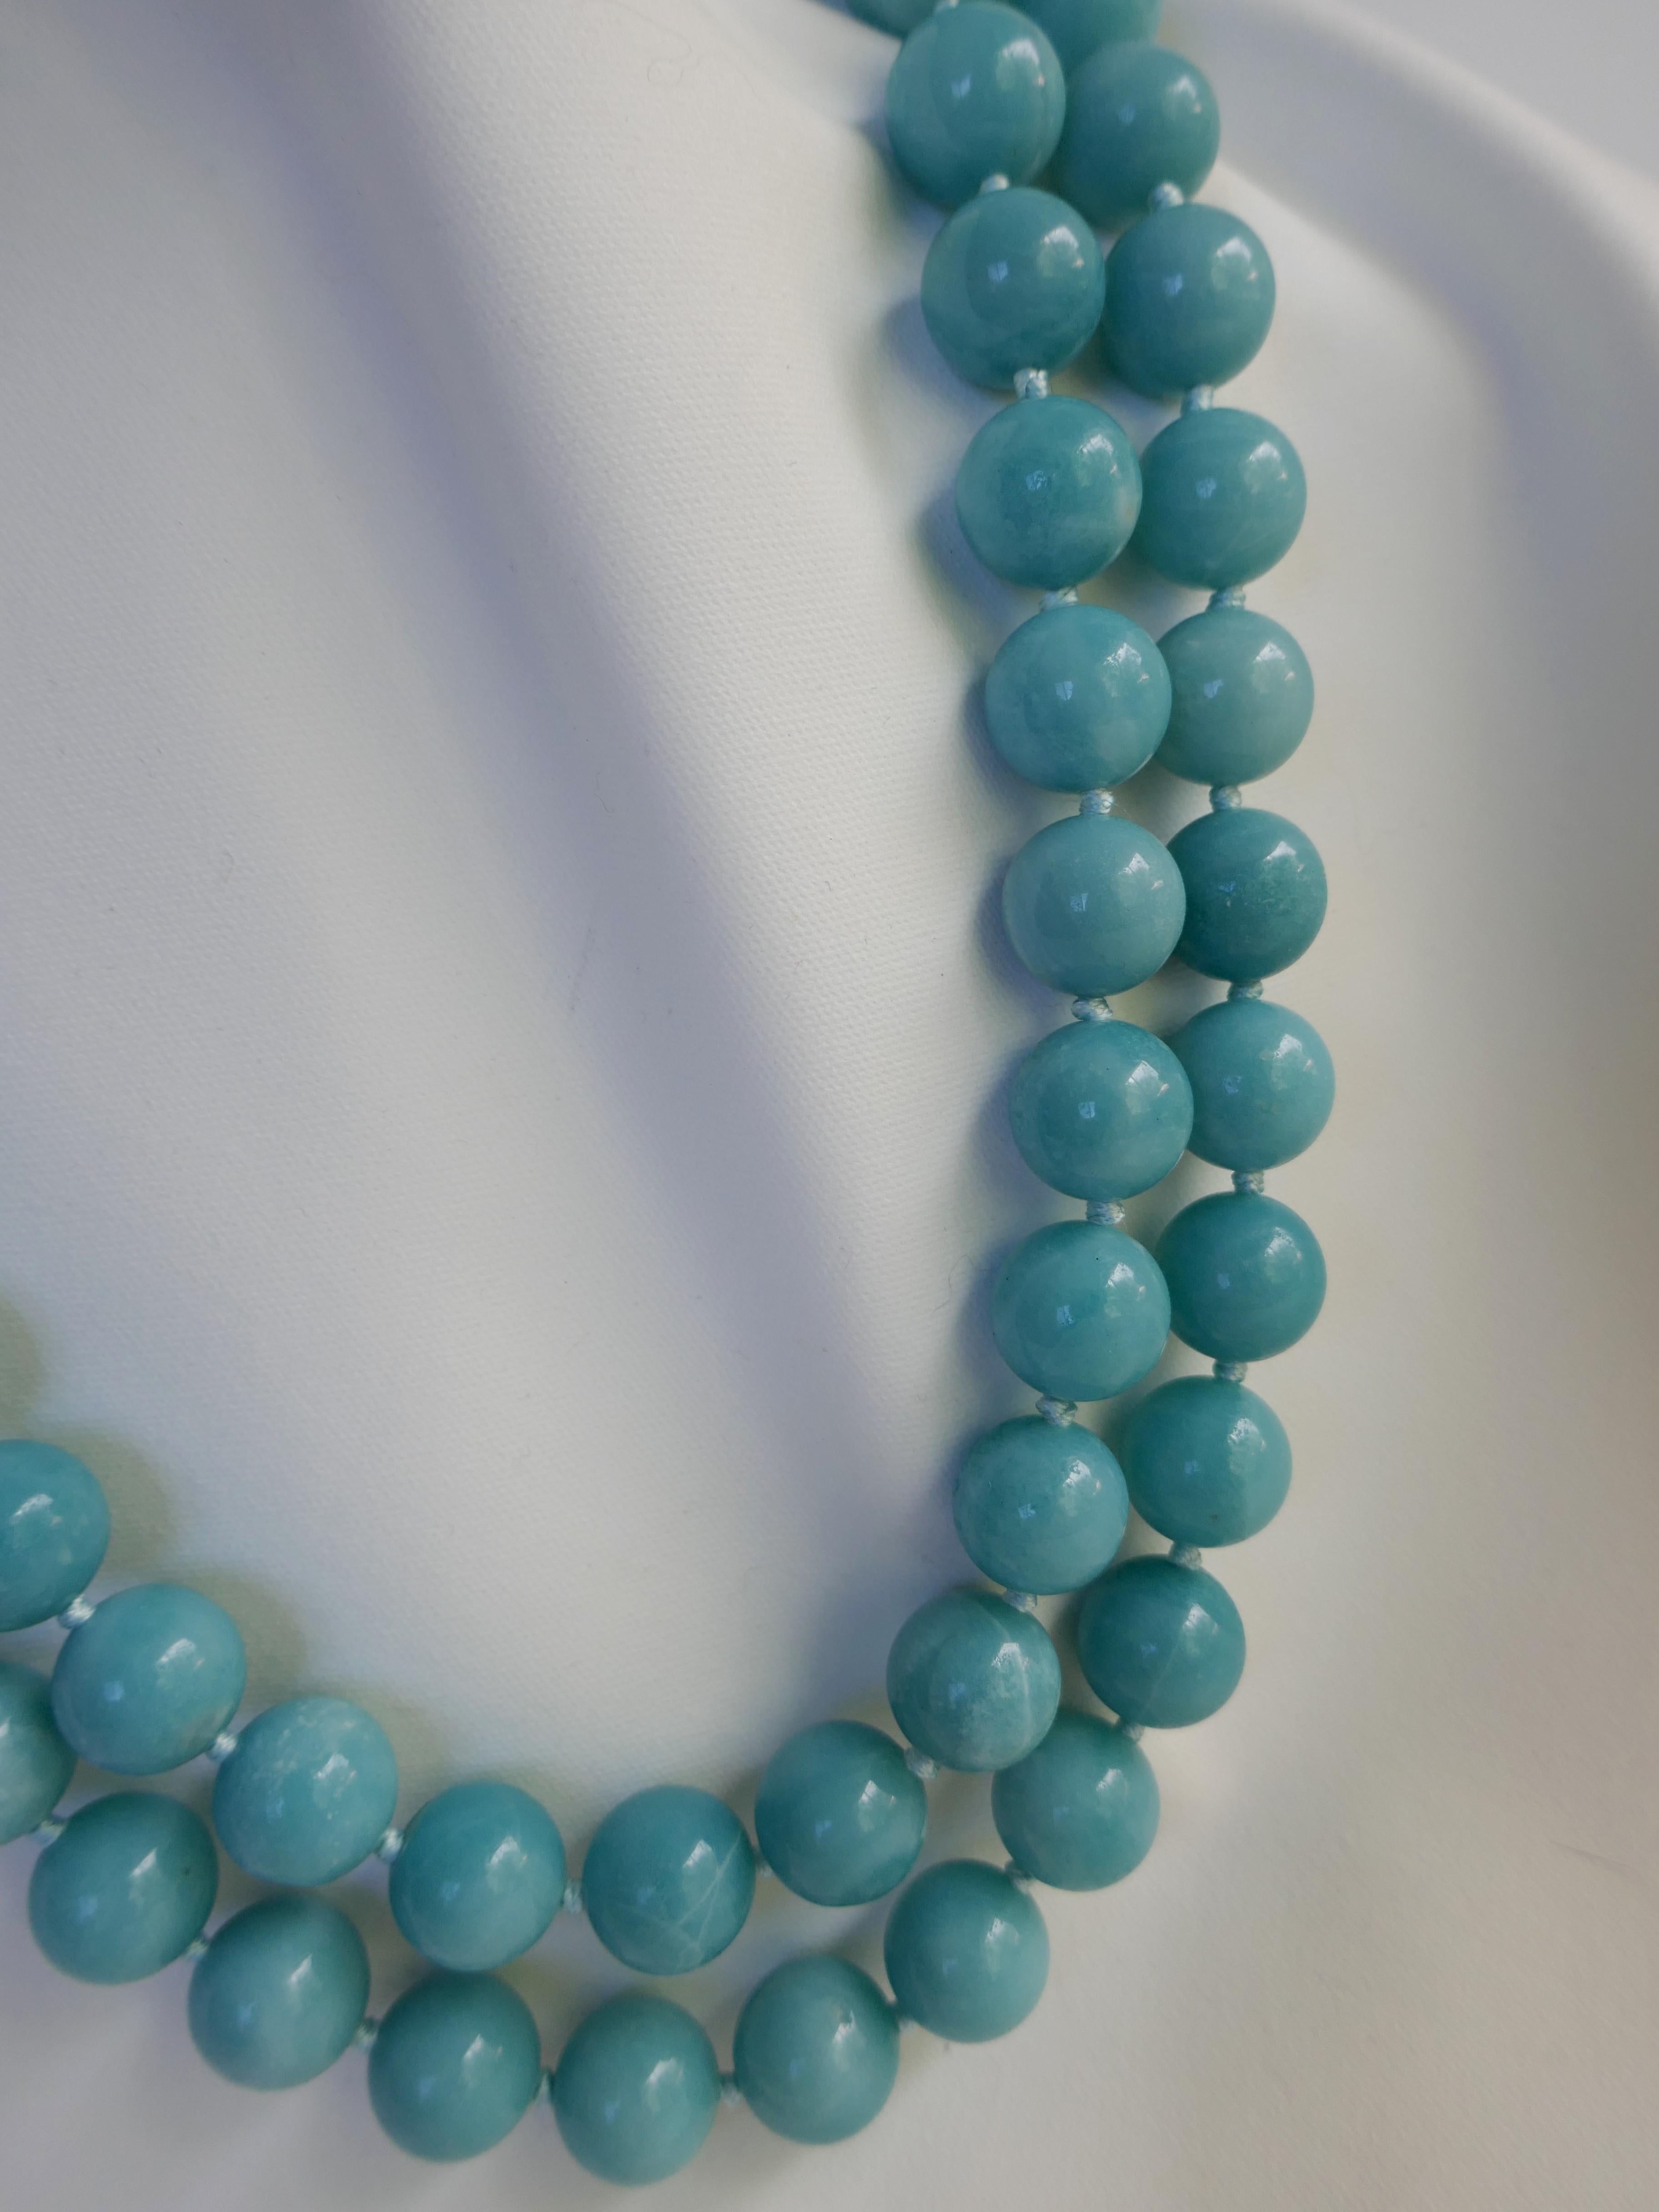 This double strand 14mm amazonite is a spectacular necklace. The color of the amazonite is beautiful and the necklace looks amazing on. Amazonite like turquoise is a neutral color stone and goes with many color. I wear mine year round, specially in